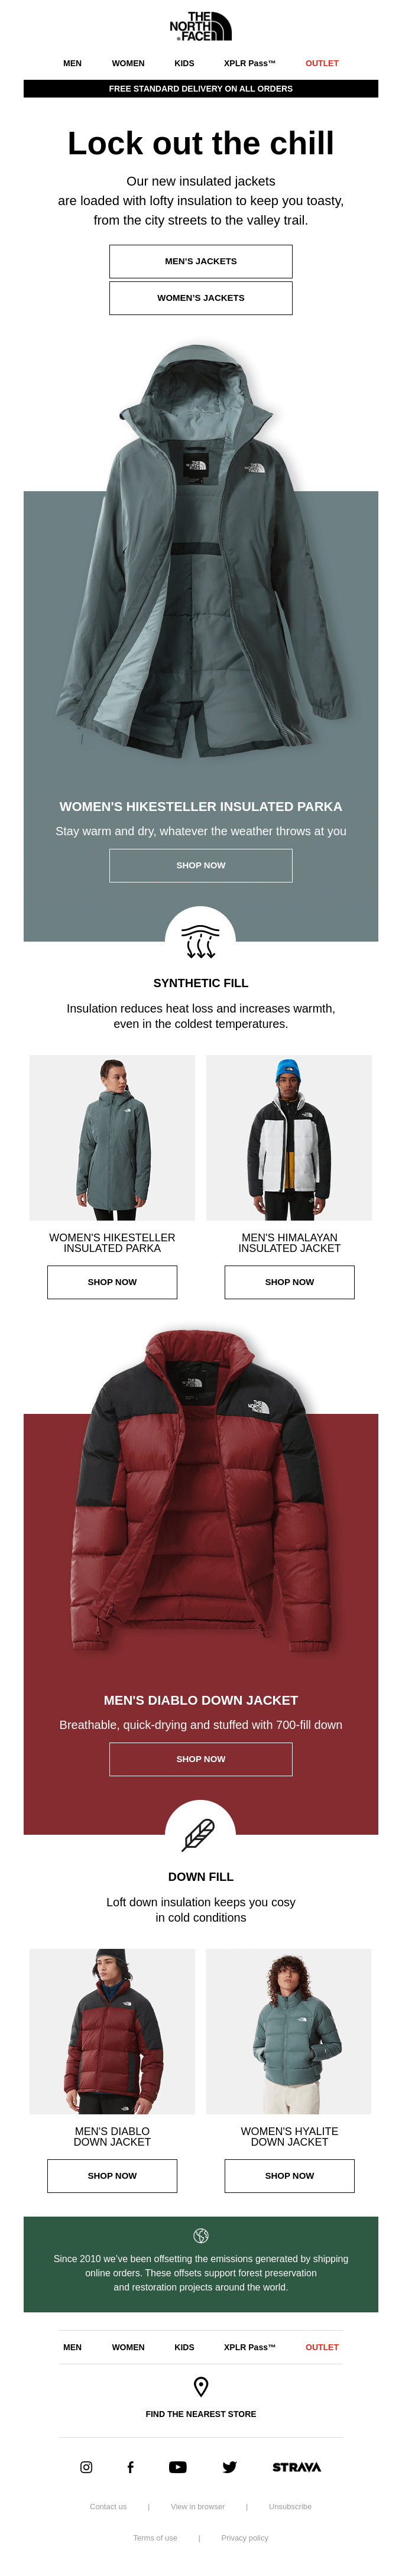 Insulated jackets for cold-weather exploring